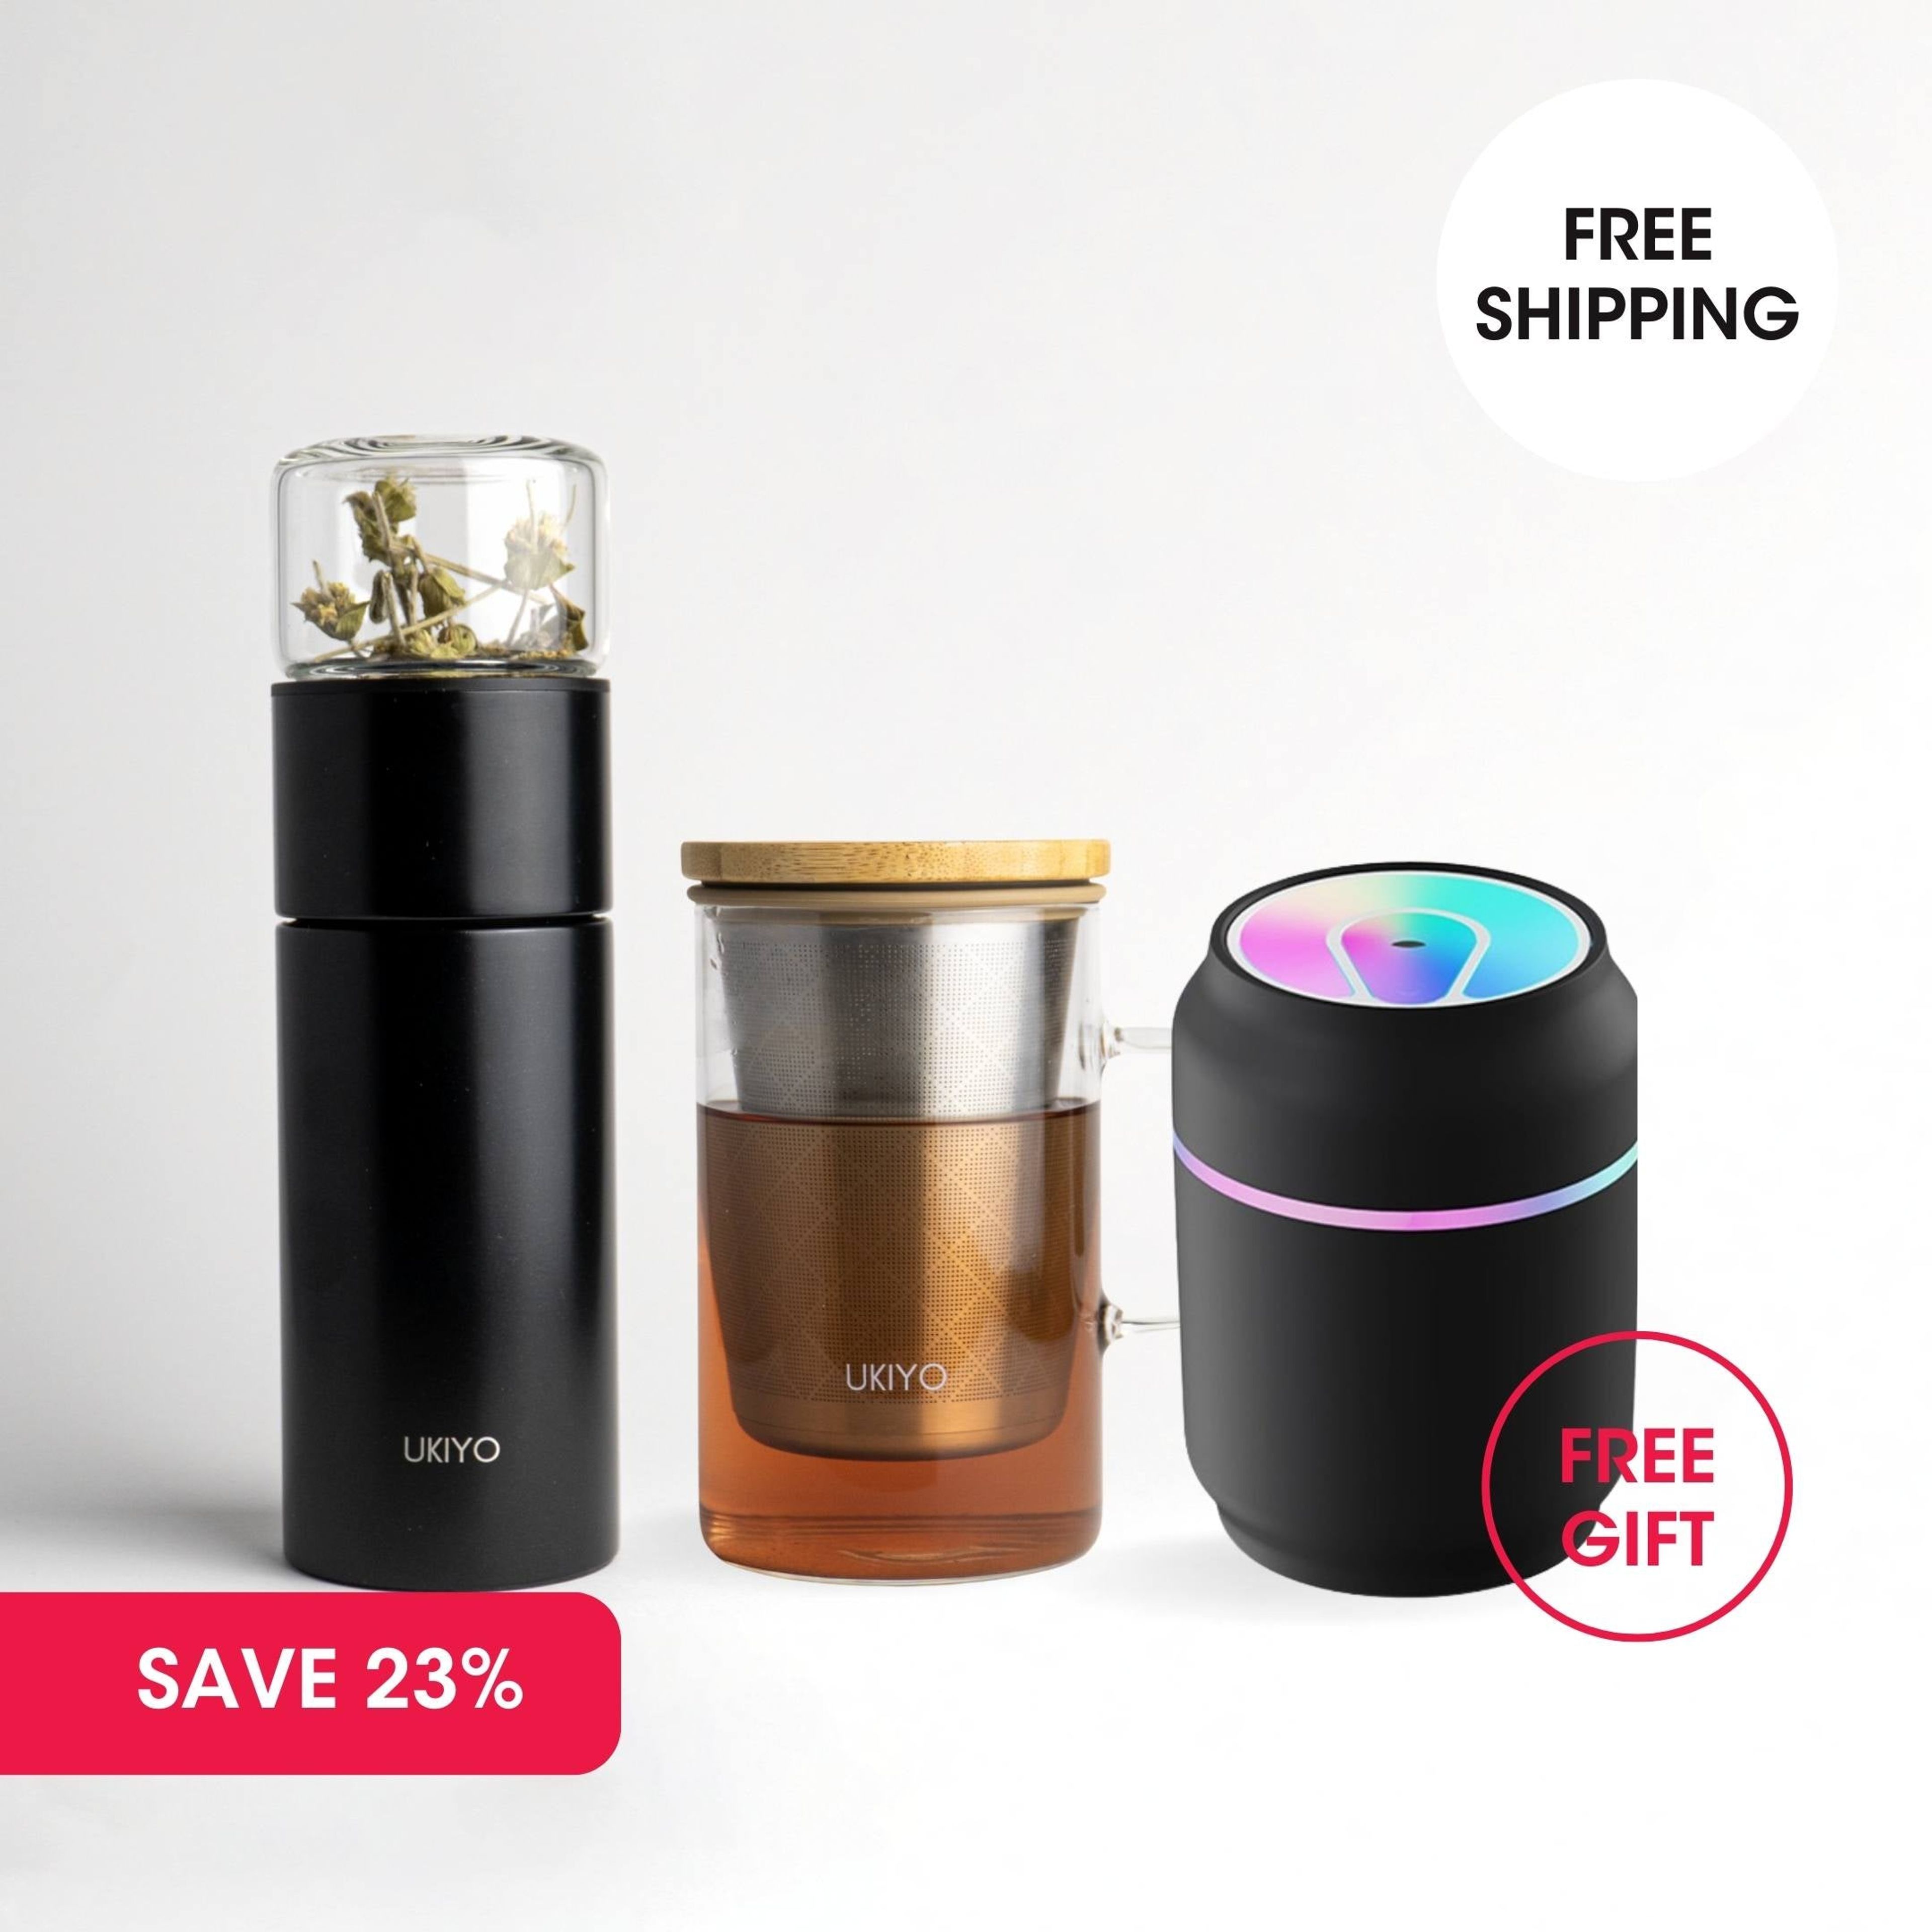 Double Up Promo Pack - 2 Premium Infusers & FREE Joki Humidifier